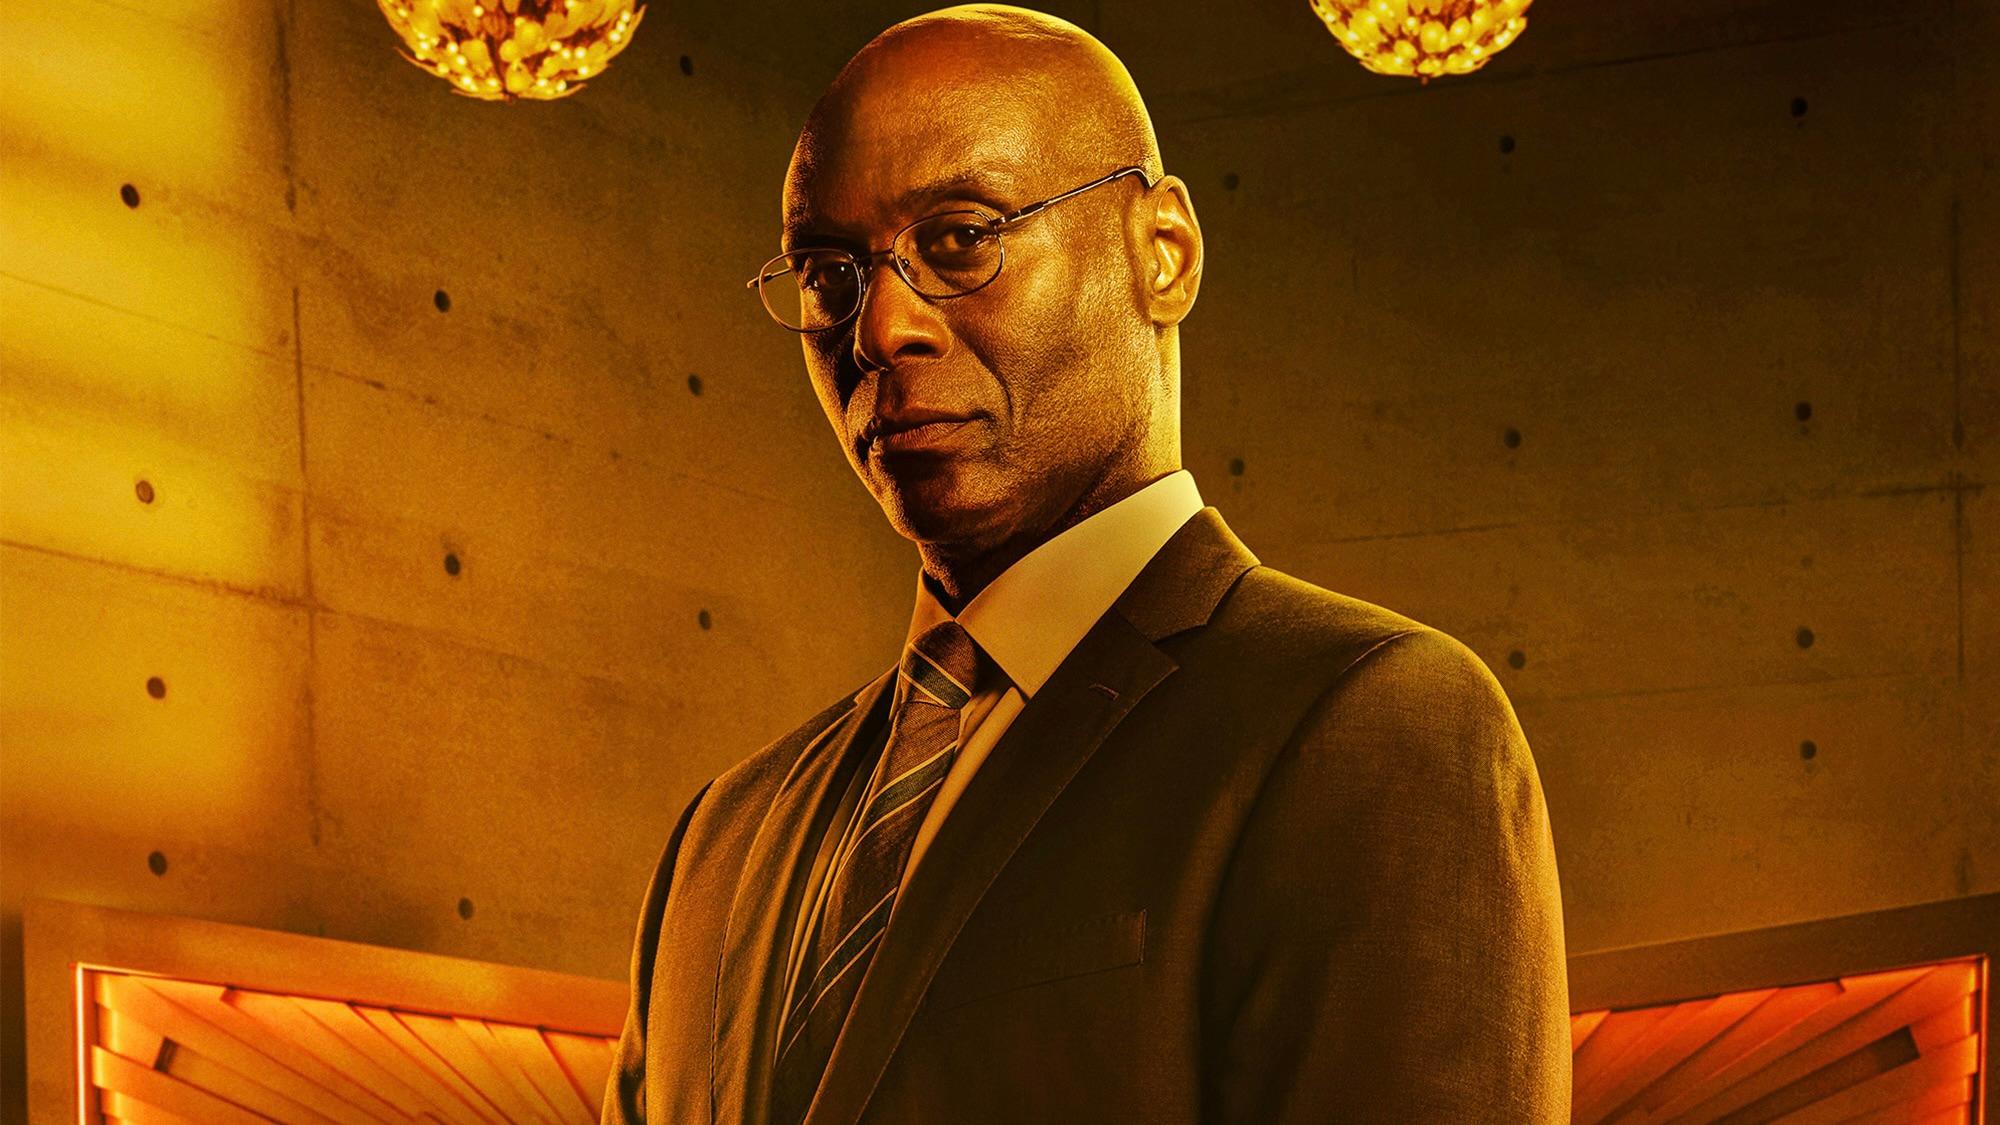 Lance Reddick as Charon the Concierge in John Wick: Chapter 4.